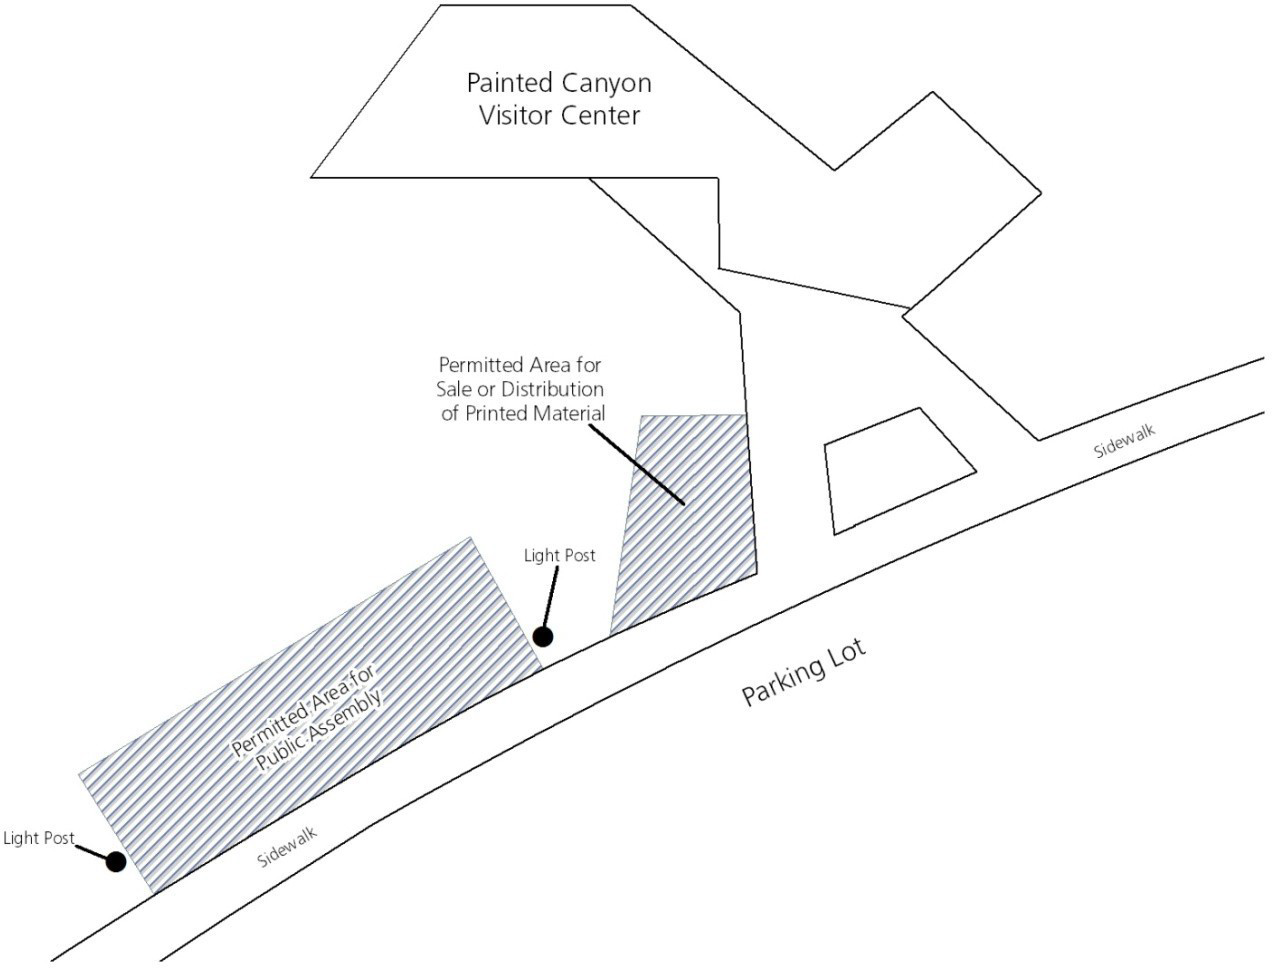 A map showing the Painted Canyon Visitor Center area and designated location for printed materials and permitted area for public assembly. Both areas are to the bottom left of the visitor center along a sidewalk.